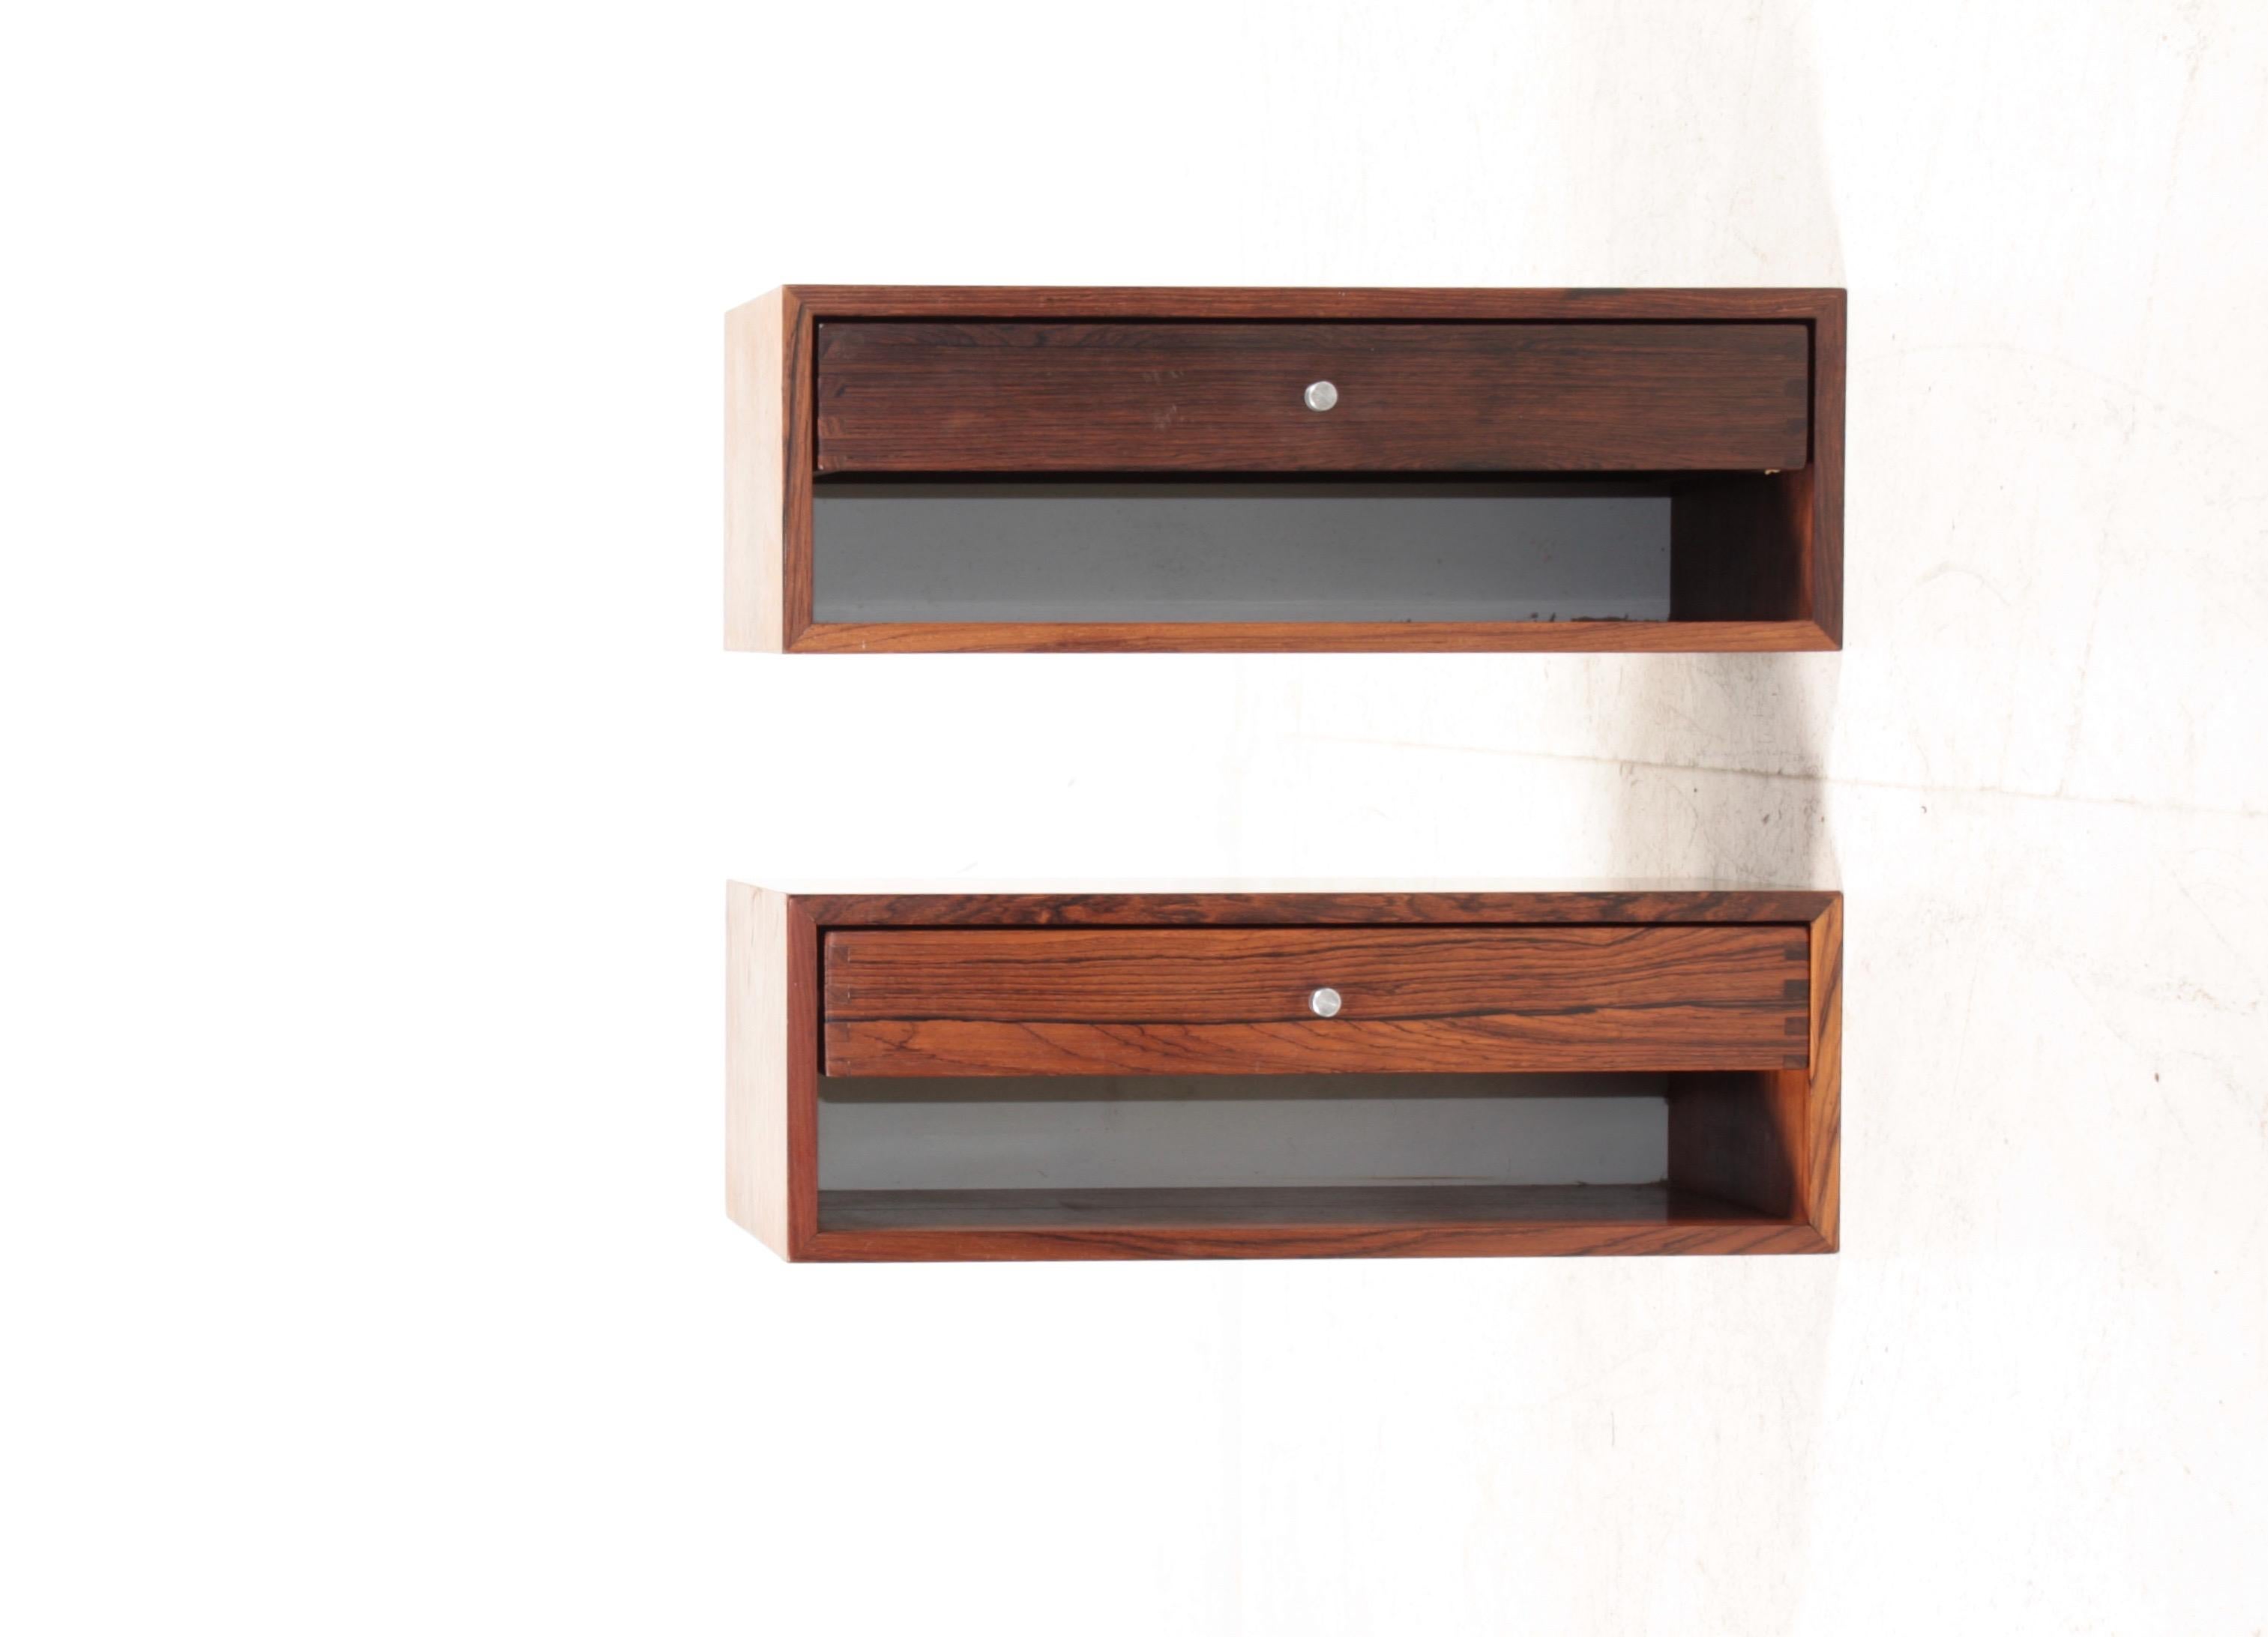 Pair of floating wall nightstands in rosewood with steel hardware. Designed by Danish Kai Kristiansen and made by cabinetmaker Aksel Kjersgaard. Great original condition.

